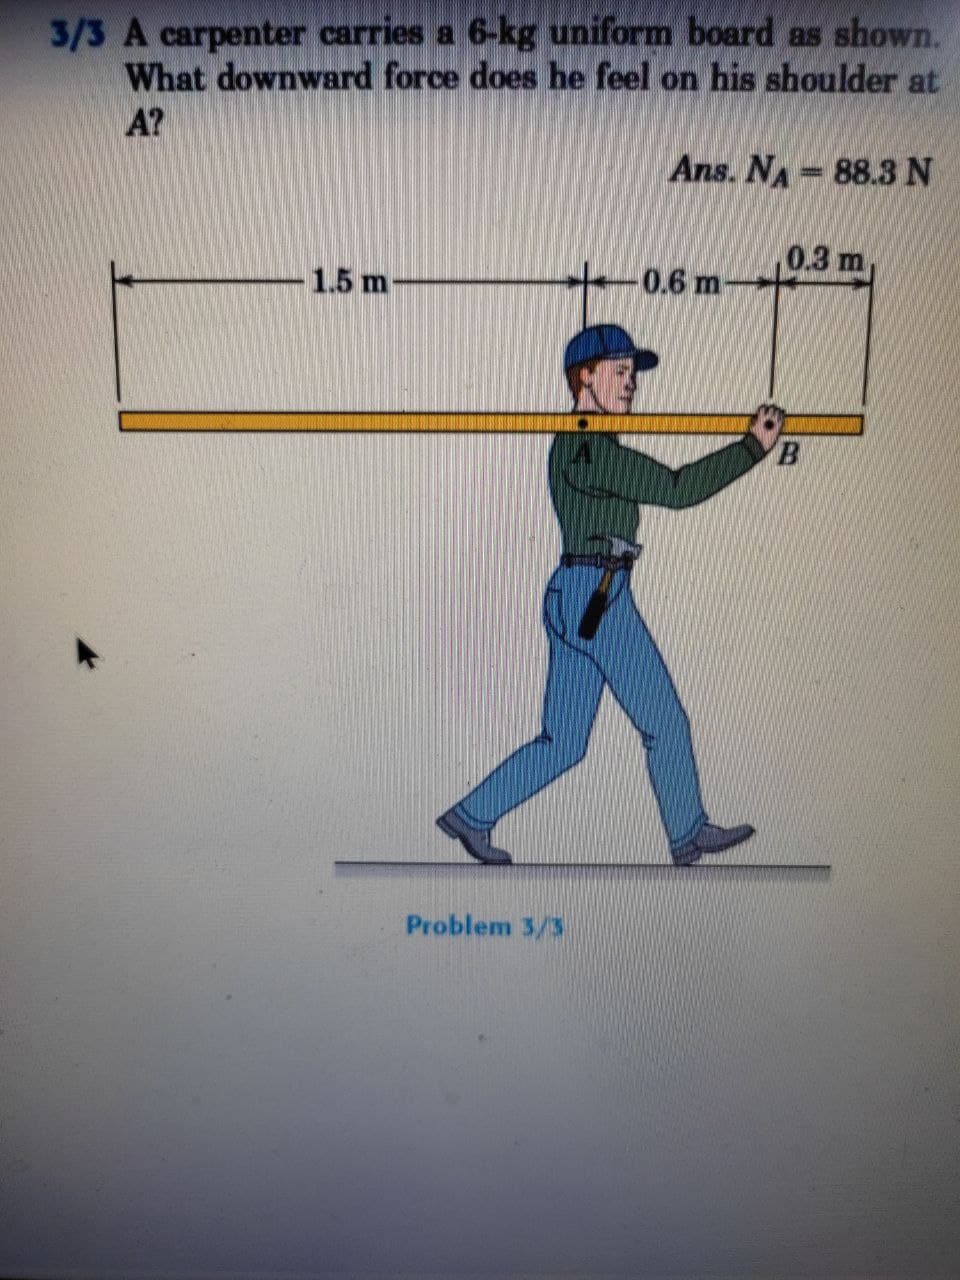 3/3 A carpenter carries a 6-kg uniform board as shown.
What downward force does he feel on his shoulder at
A?
Ans. NA 88.3 N
0.3 m
-1.5 m
-0.6 m
Problem 3/3
